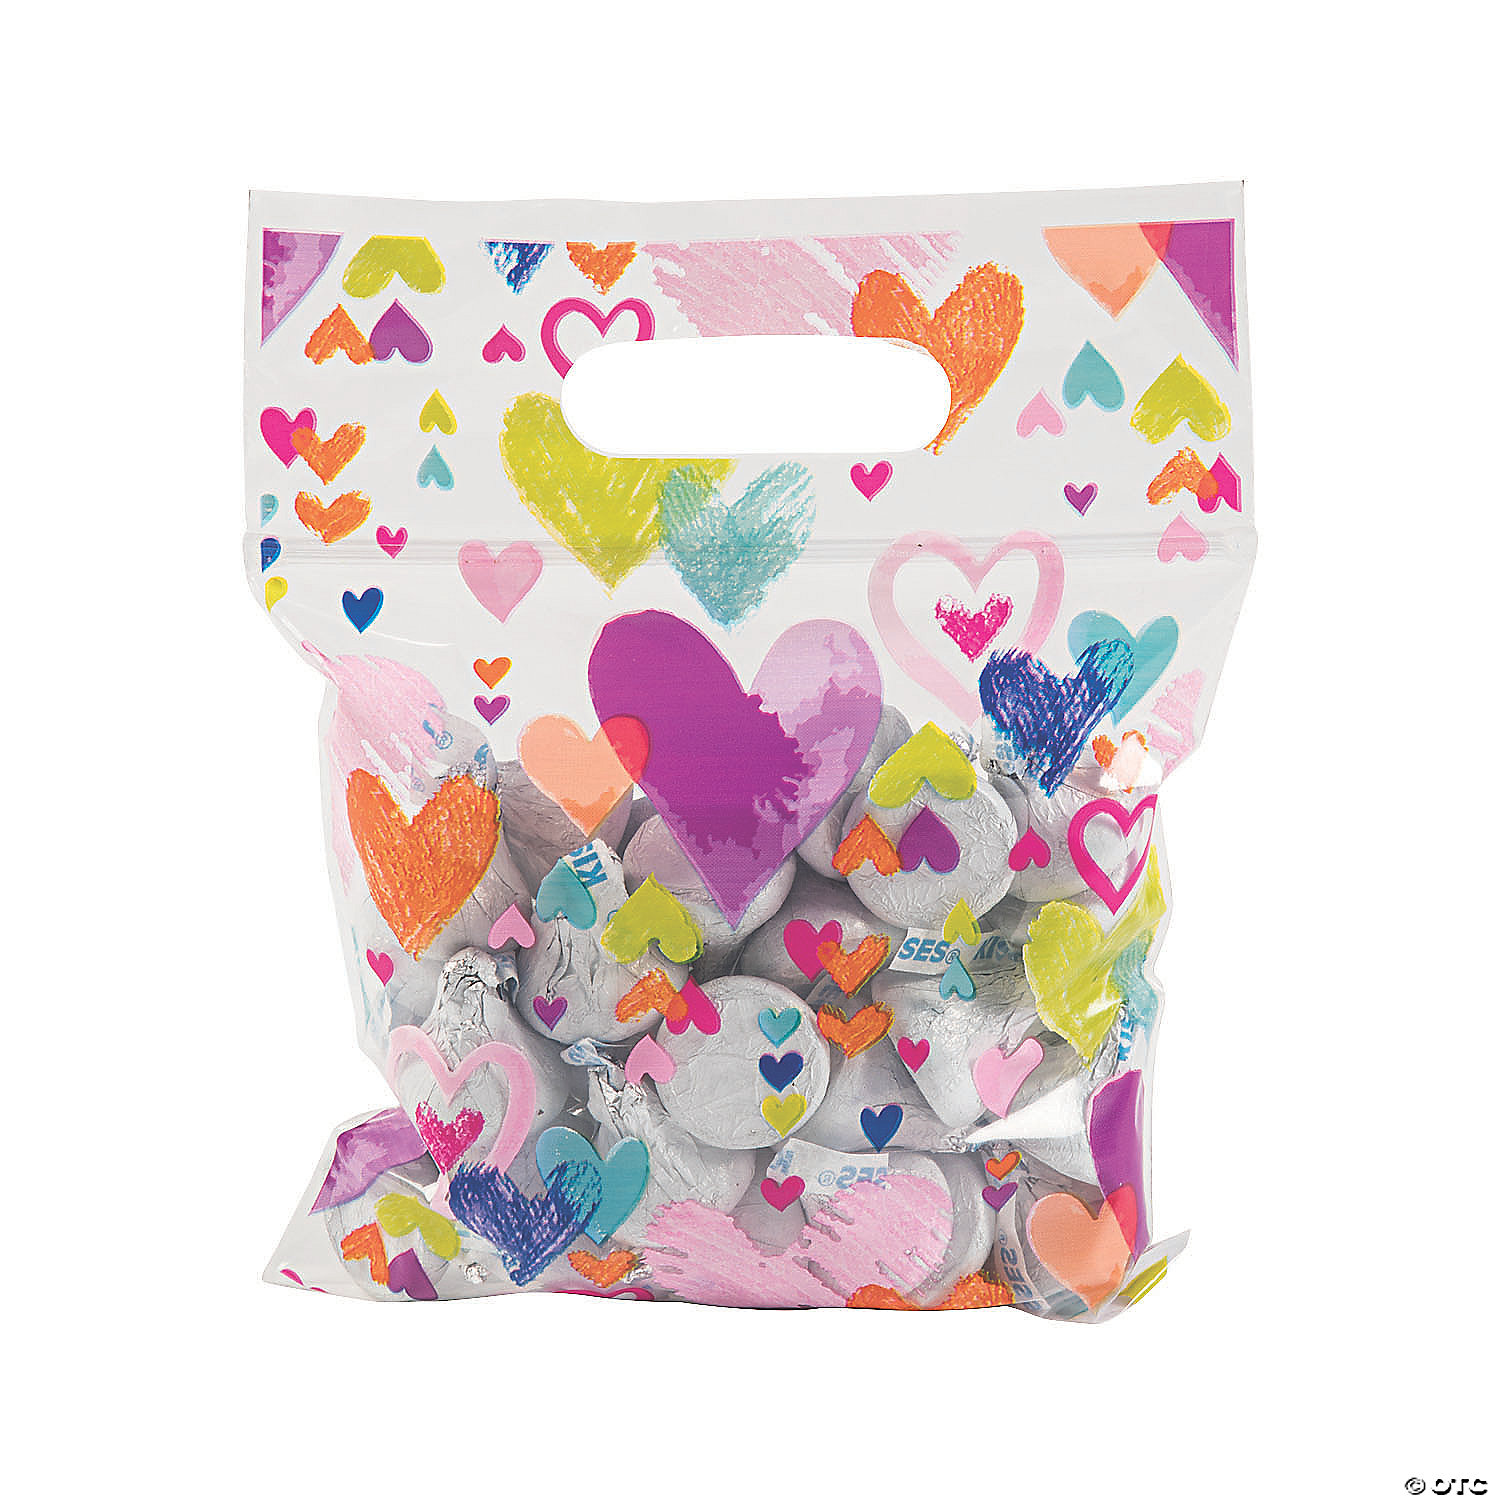 12 x Valentines Zipper Seal Teddy Bear Heart Loot Bags Party treat favour bags 